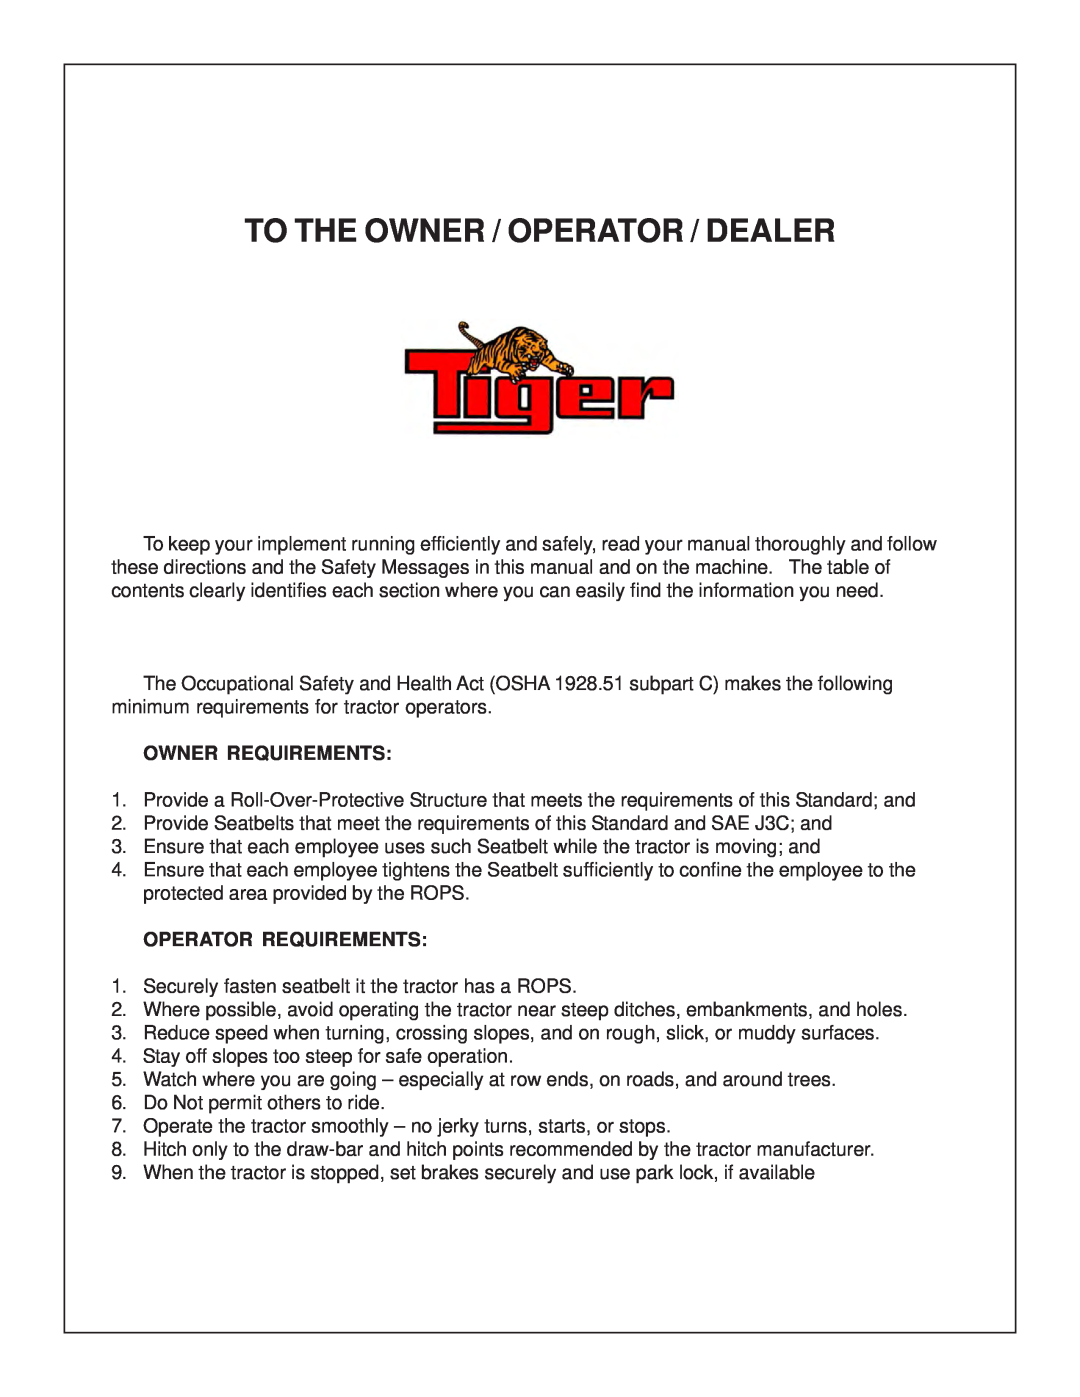 Tiger Products Co., Ltd 6020009 manual To The Owner / Operator / Dealer, Owner Requirements, Operator Requirements 